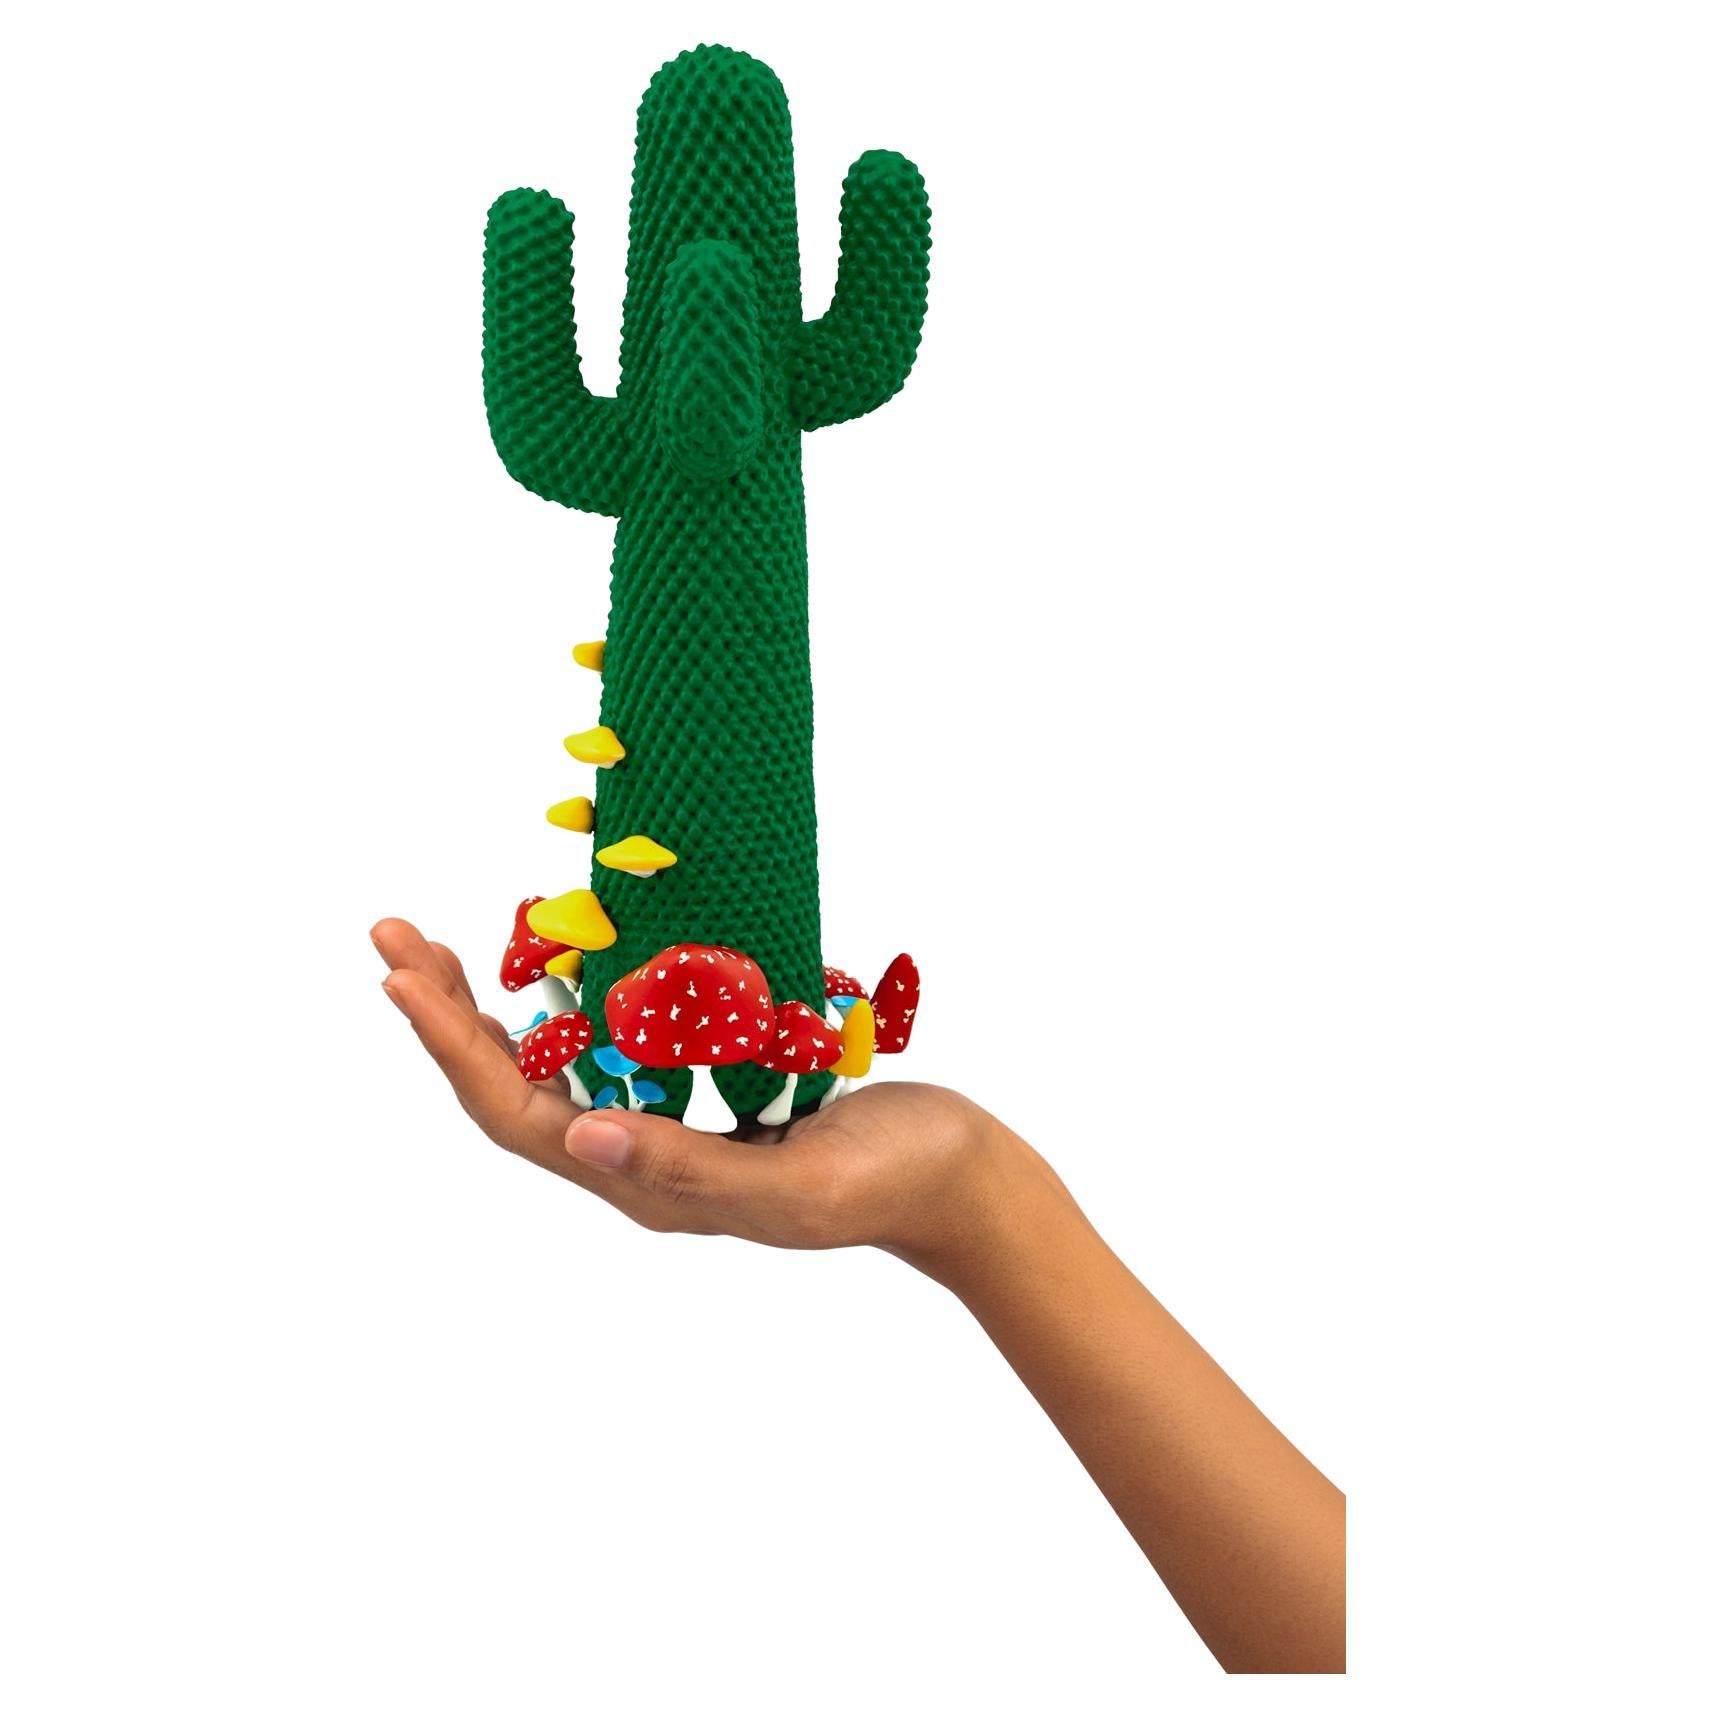 Limited Edition #66/99

Gufram presents the miniaturised version of the Shroom CACTUS® created in collaboration with A$AP Rocky and the artist’s new design studio HOMMEMADE Exactly as the real-size Shroom CACTUS®, the new Guframini piece features